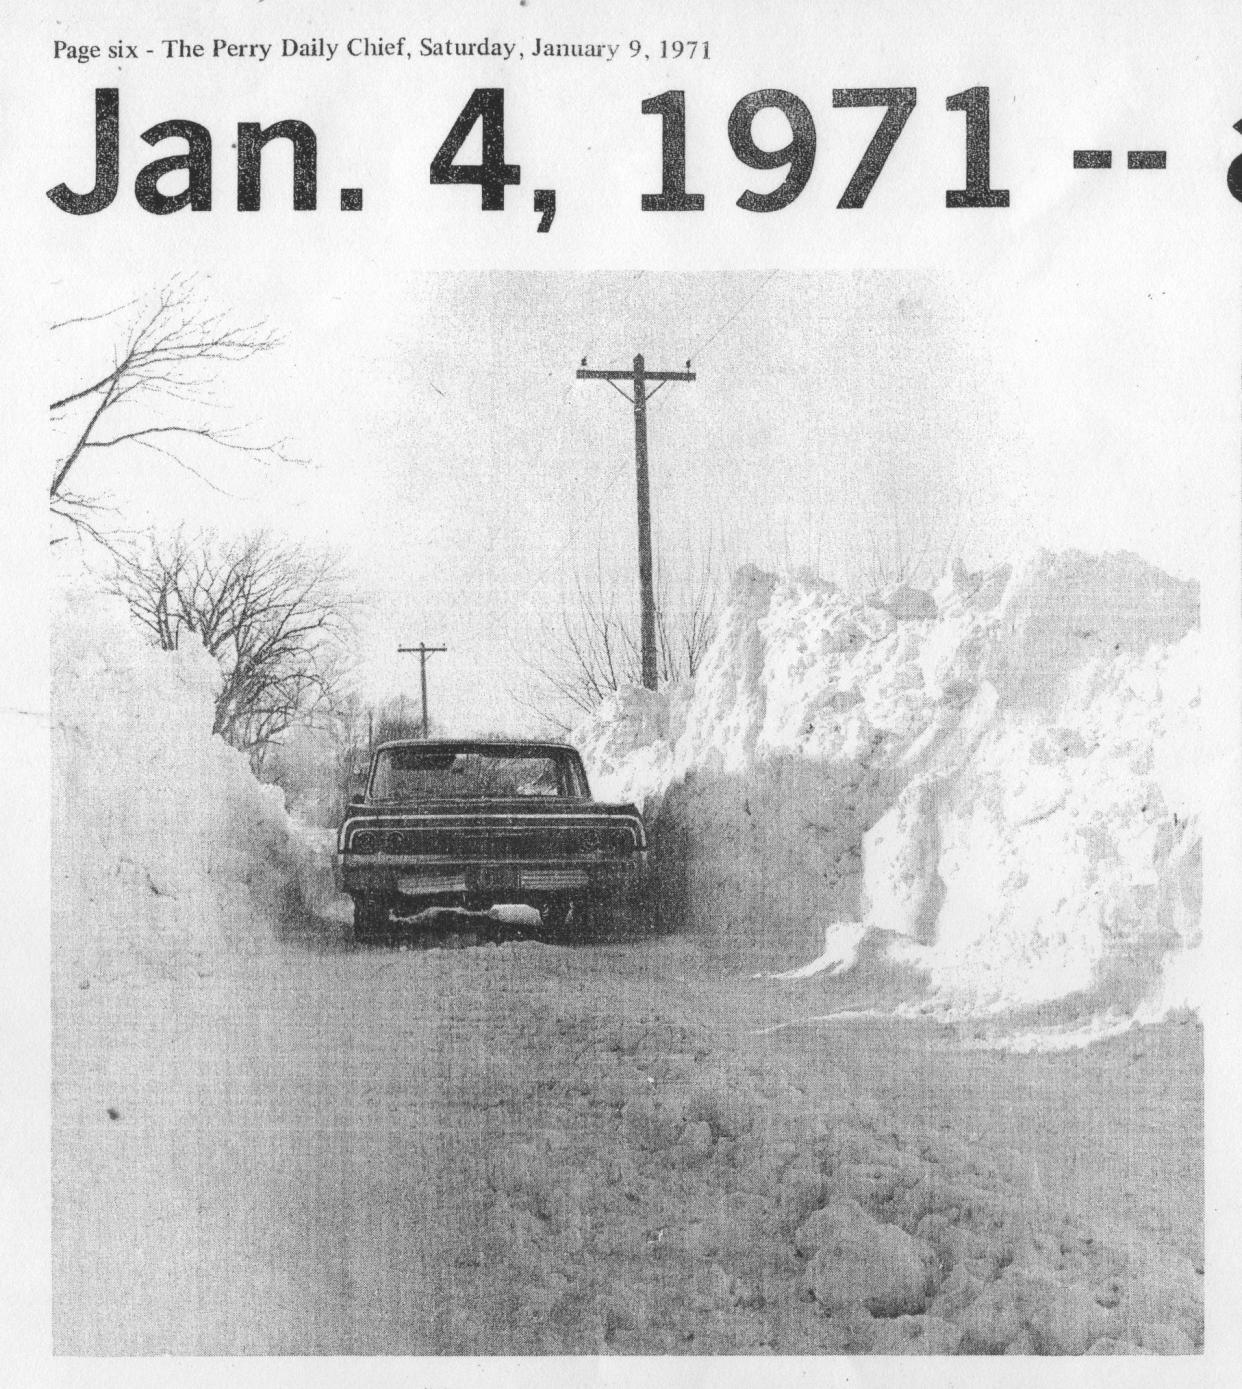 Did you know... Perry also got a little snow in January 1971?